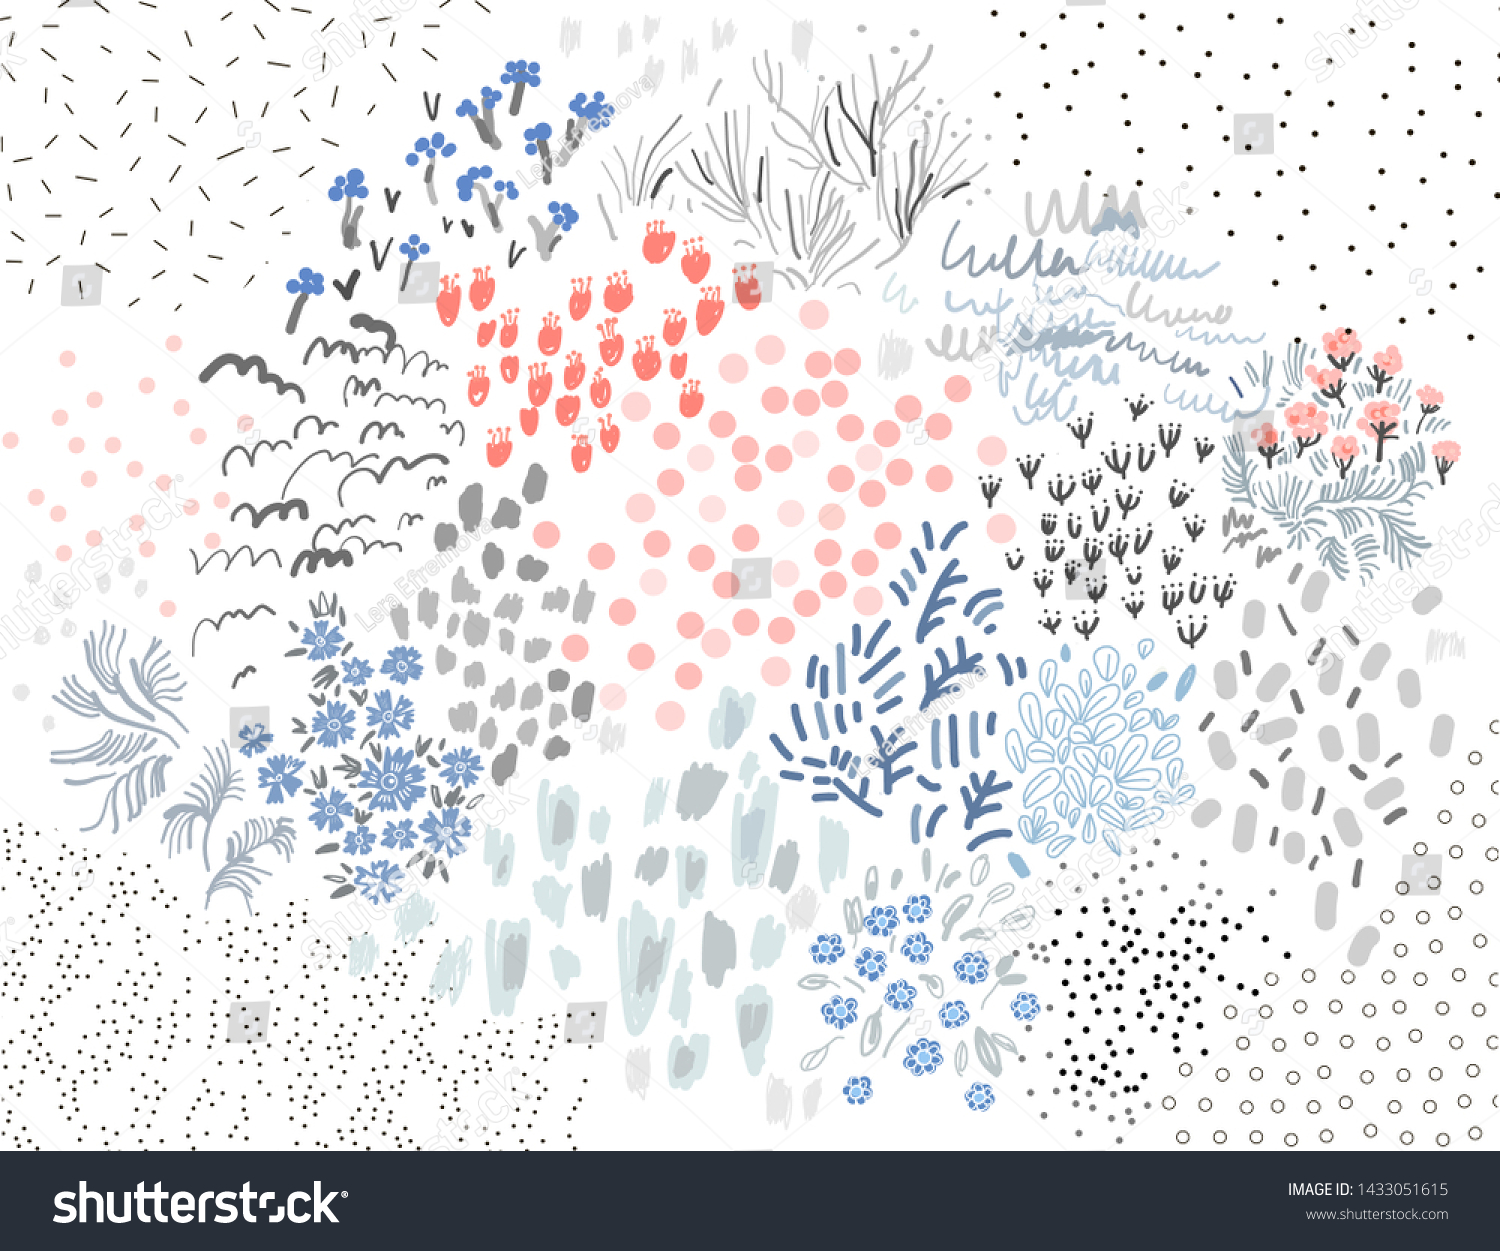 stock-vector-gentle-floral-background-artistic-header-with-flowers-and-leaves-vector-1433051615